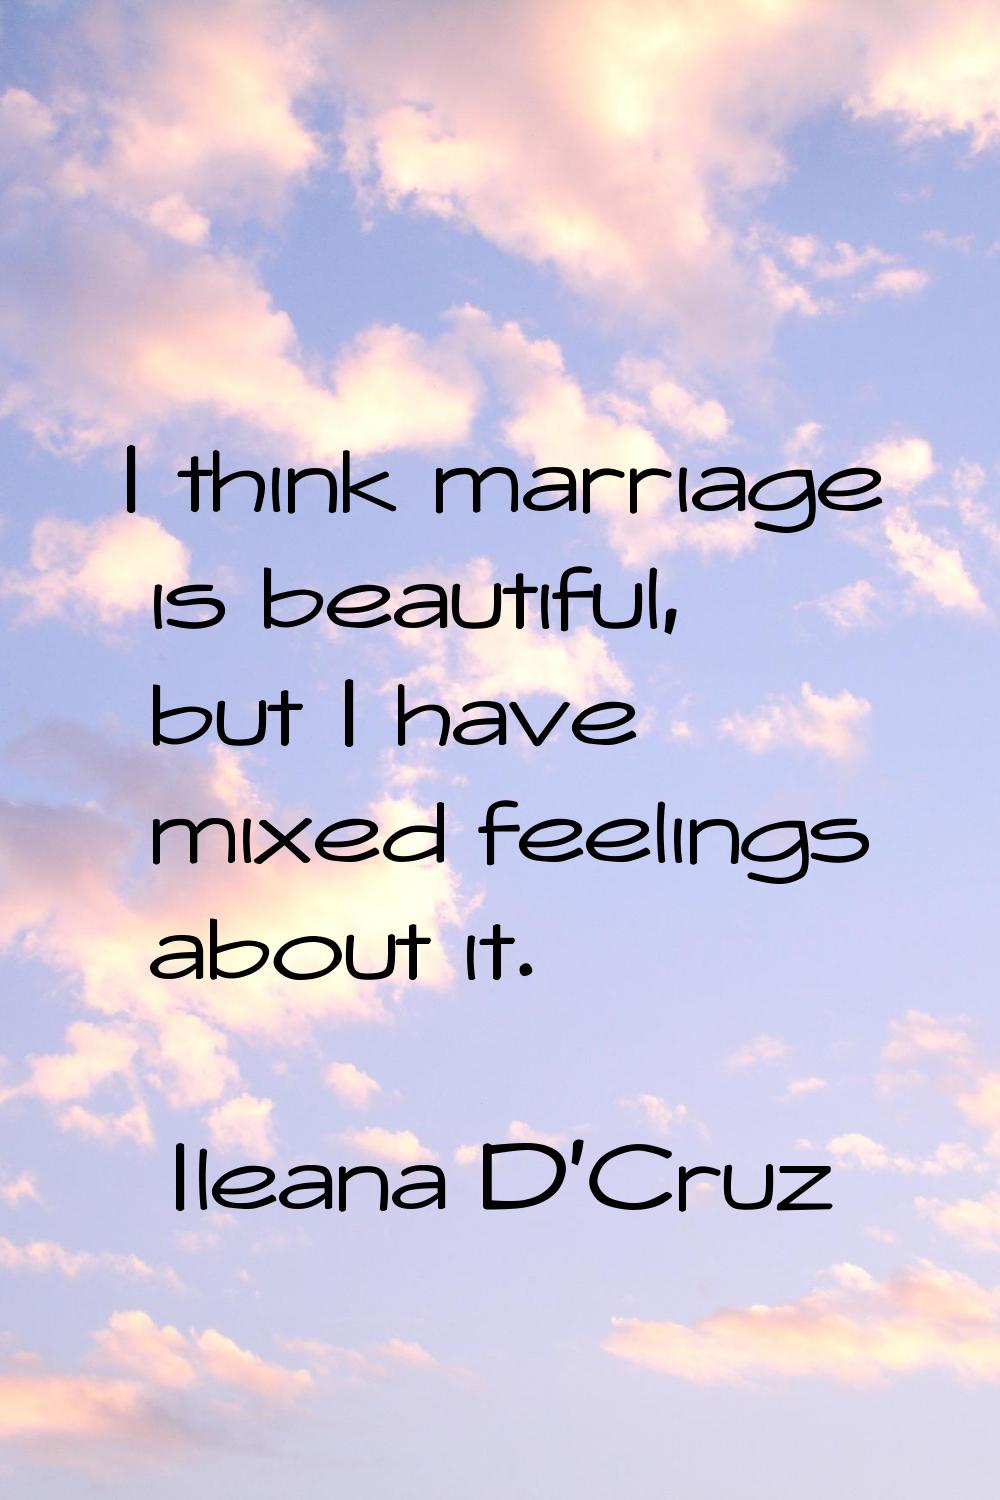 I think marriage is beautiful, but I have mixed feelings about it.